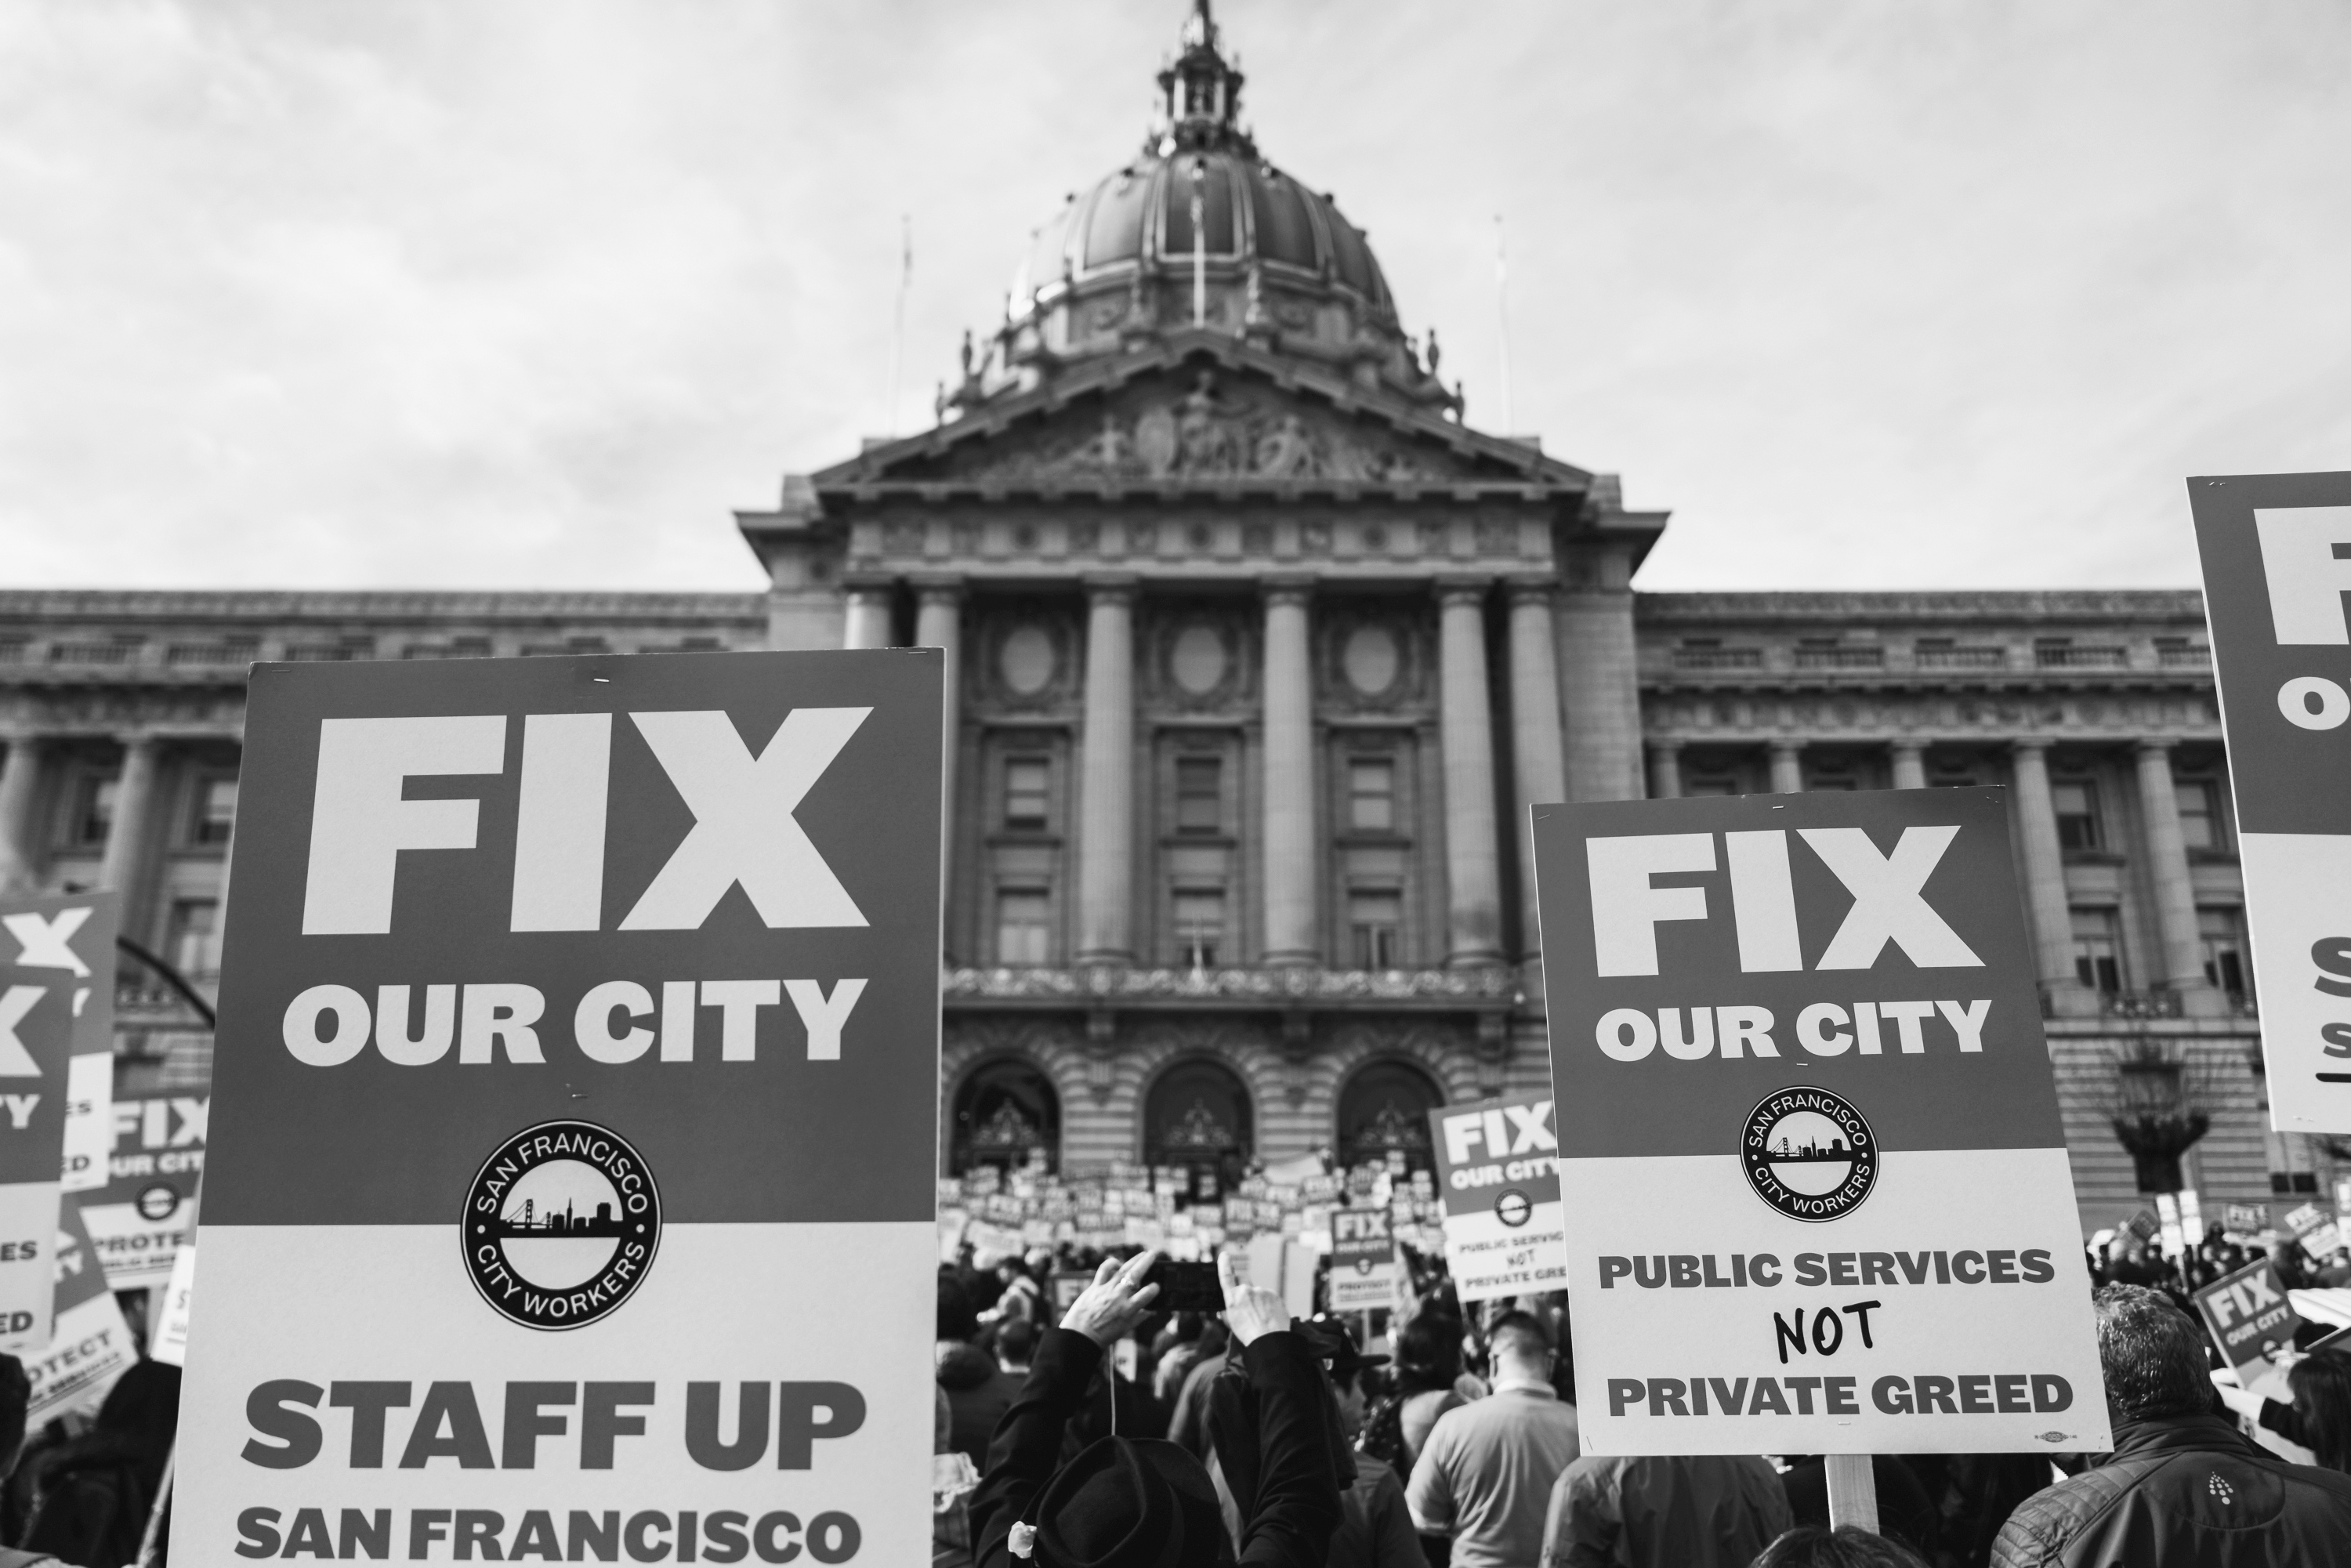 Protesters hold signs saying "FIX OUR CITY" in front of San Francisco's City Hall.